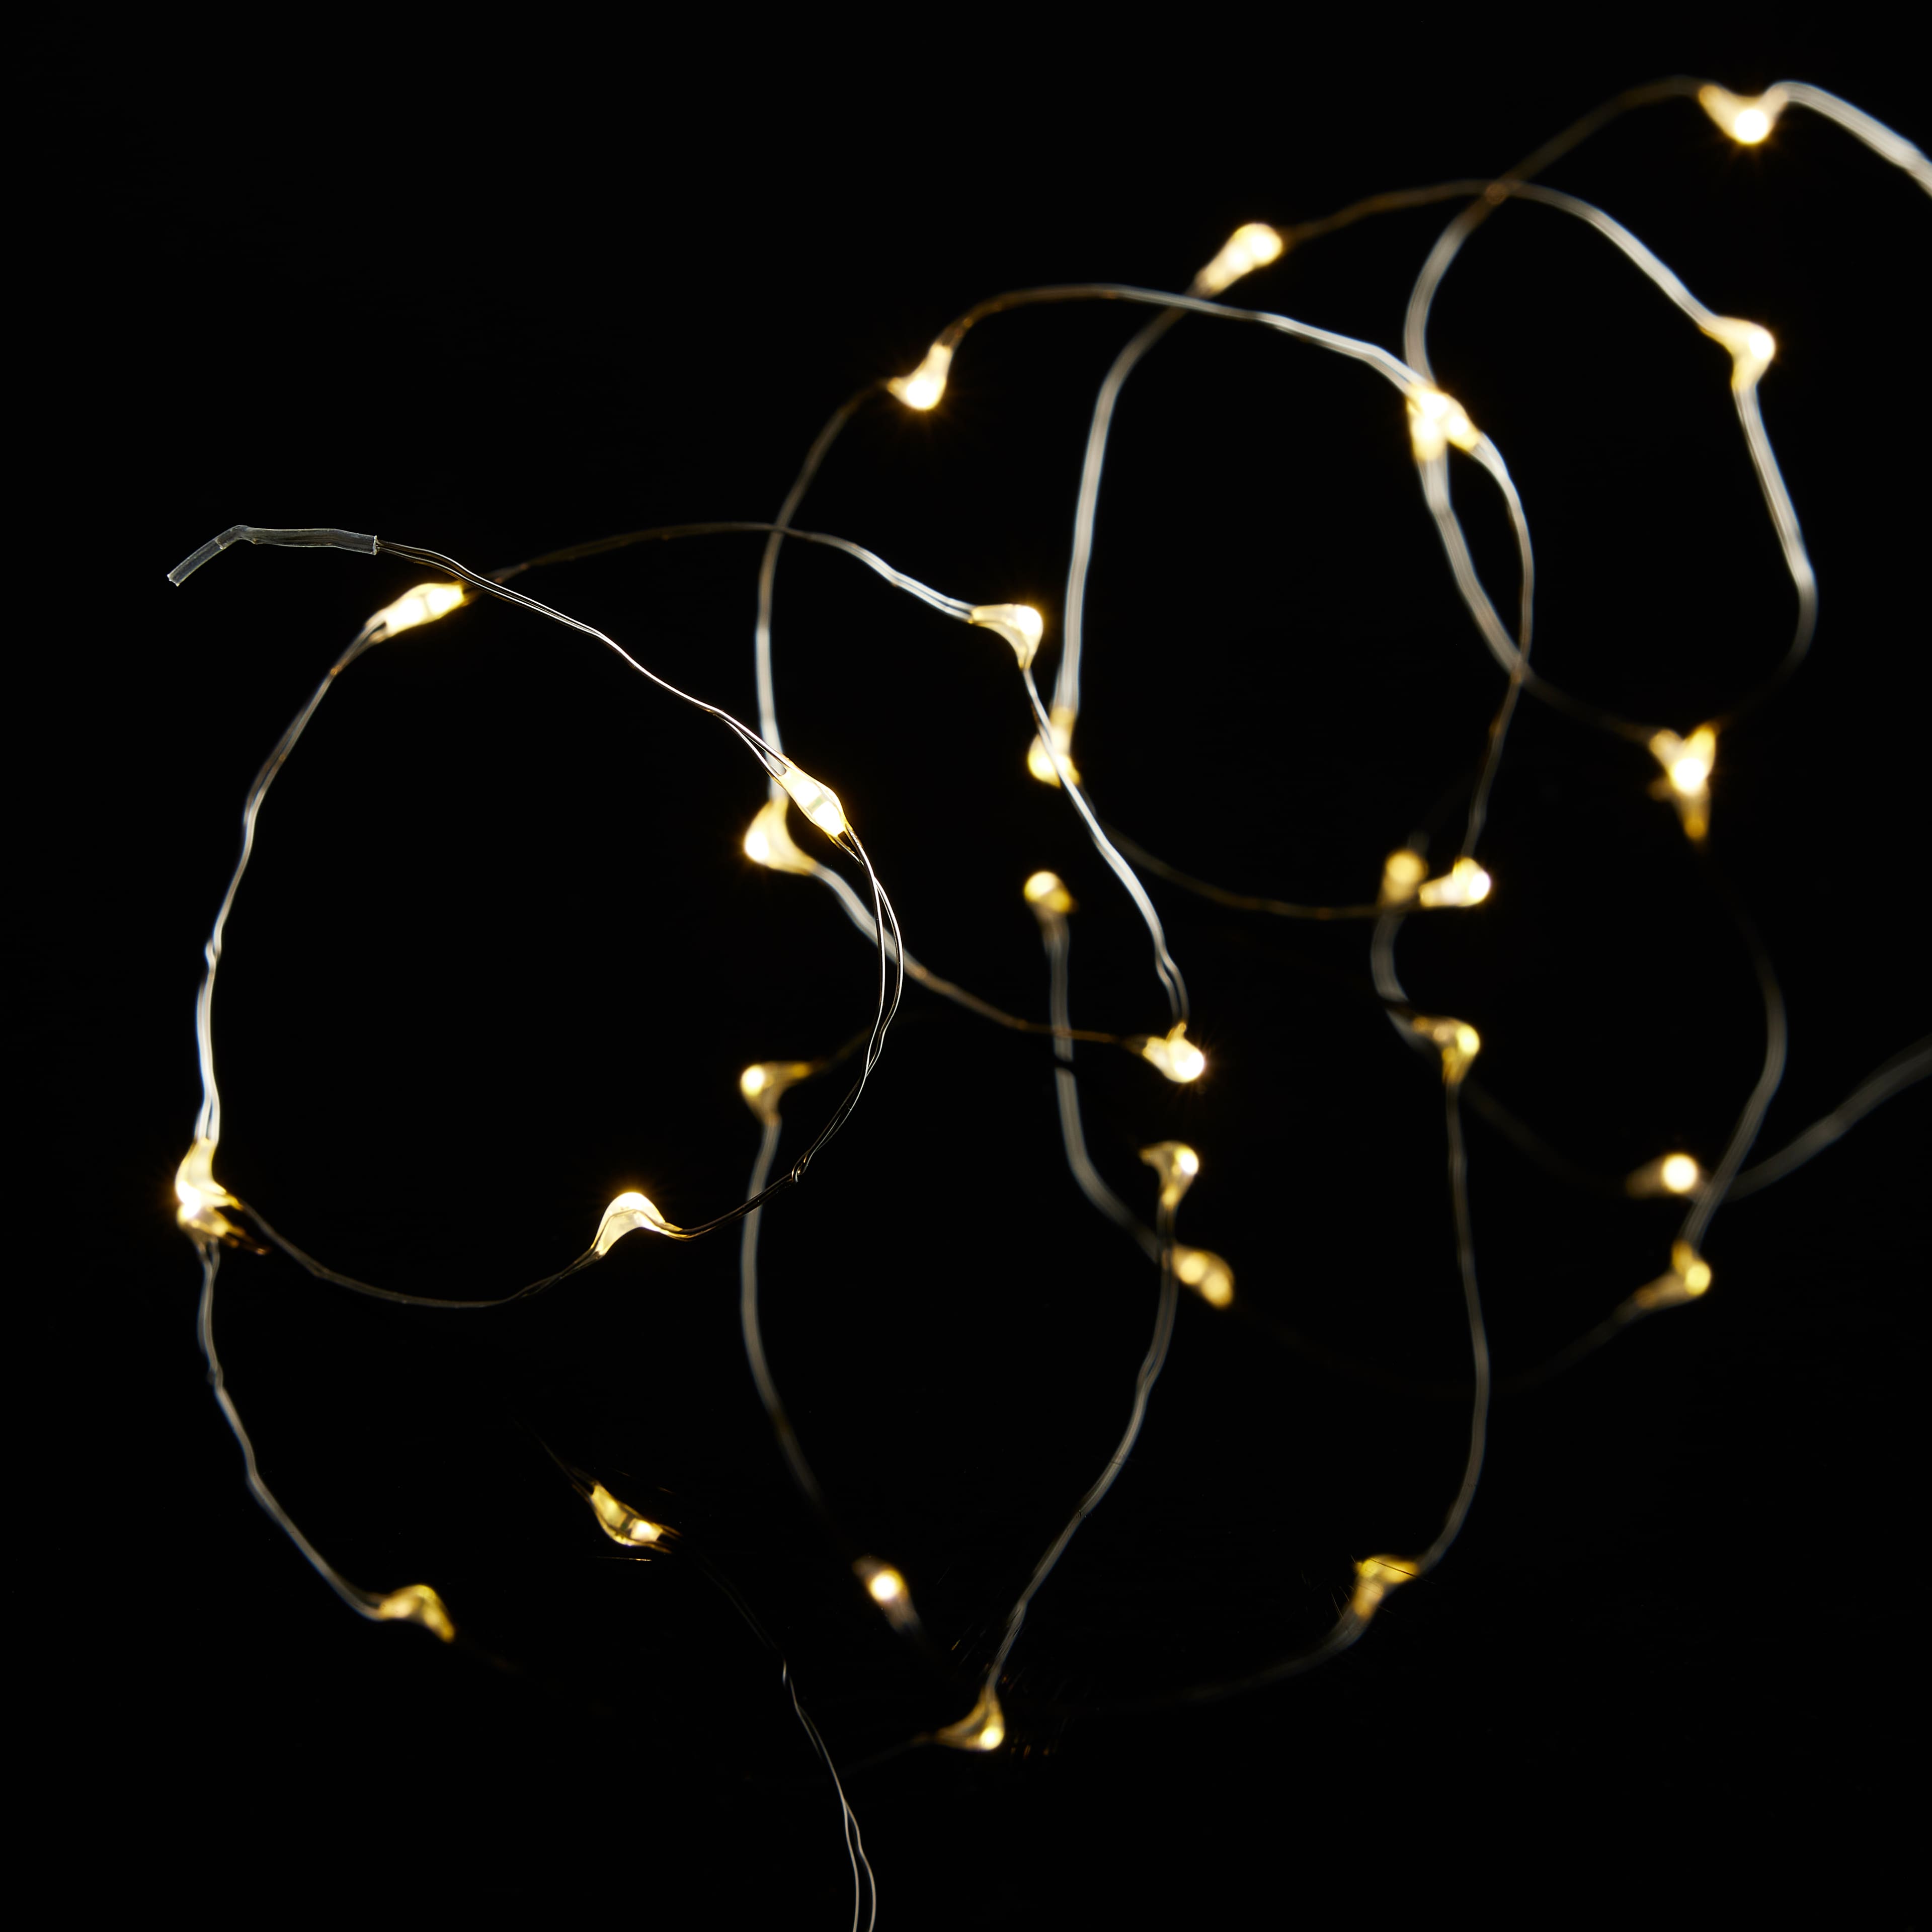 15ct. Warm White LED Crafting Lights with Mini Red Pom Poms by  Ashland®-Christmas Lights 